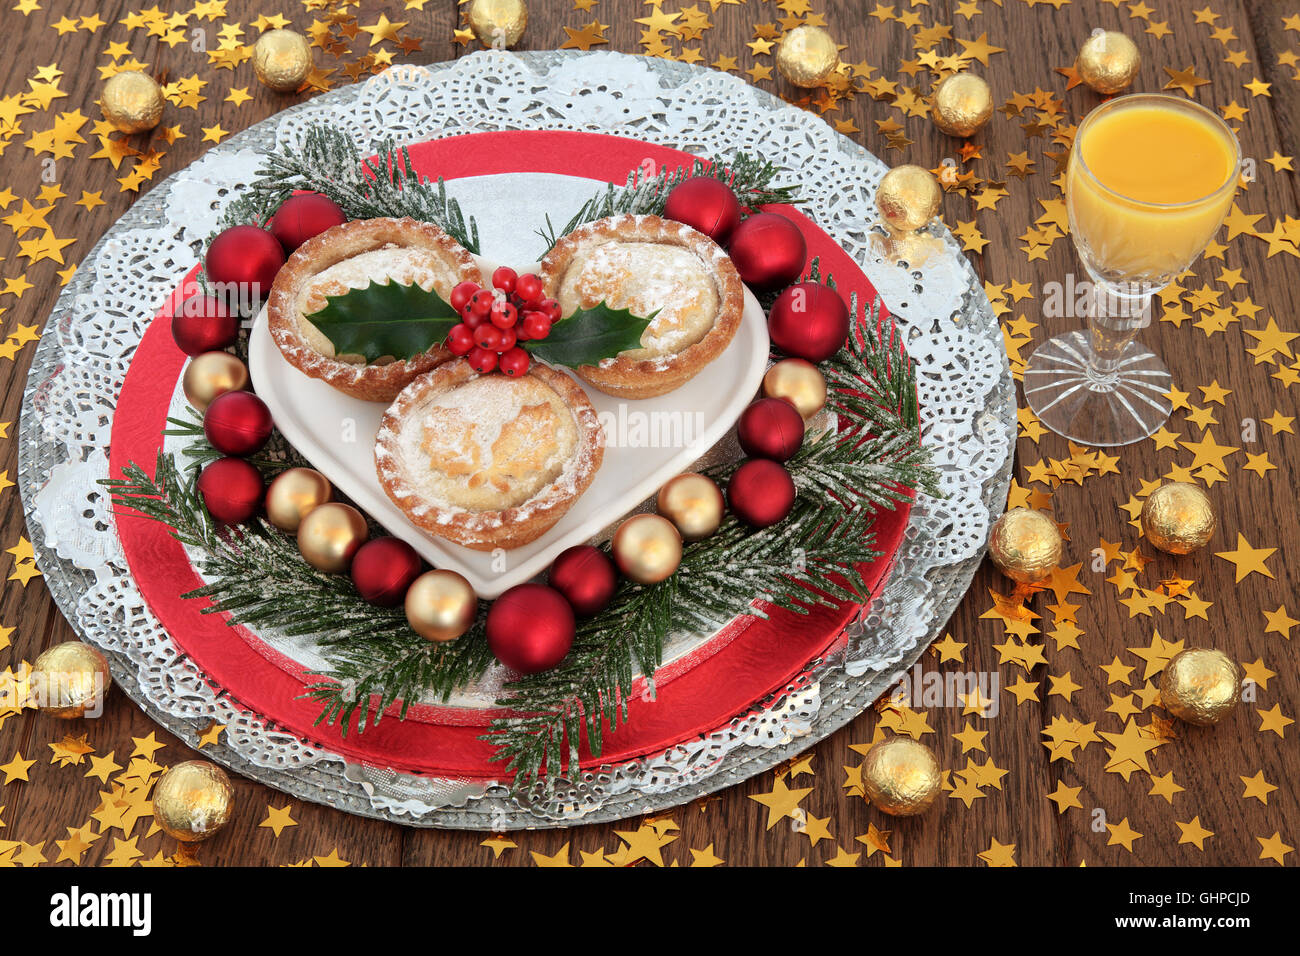 Christmas egg nog, mince pies with holly, snow covered fir, red and gold baubles, foil wrapped chocolate balls and stars. Stock Photo